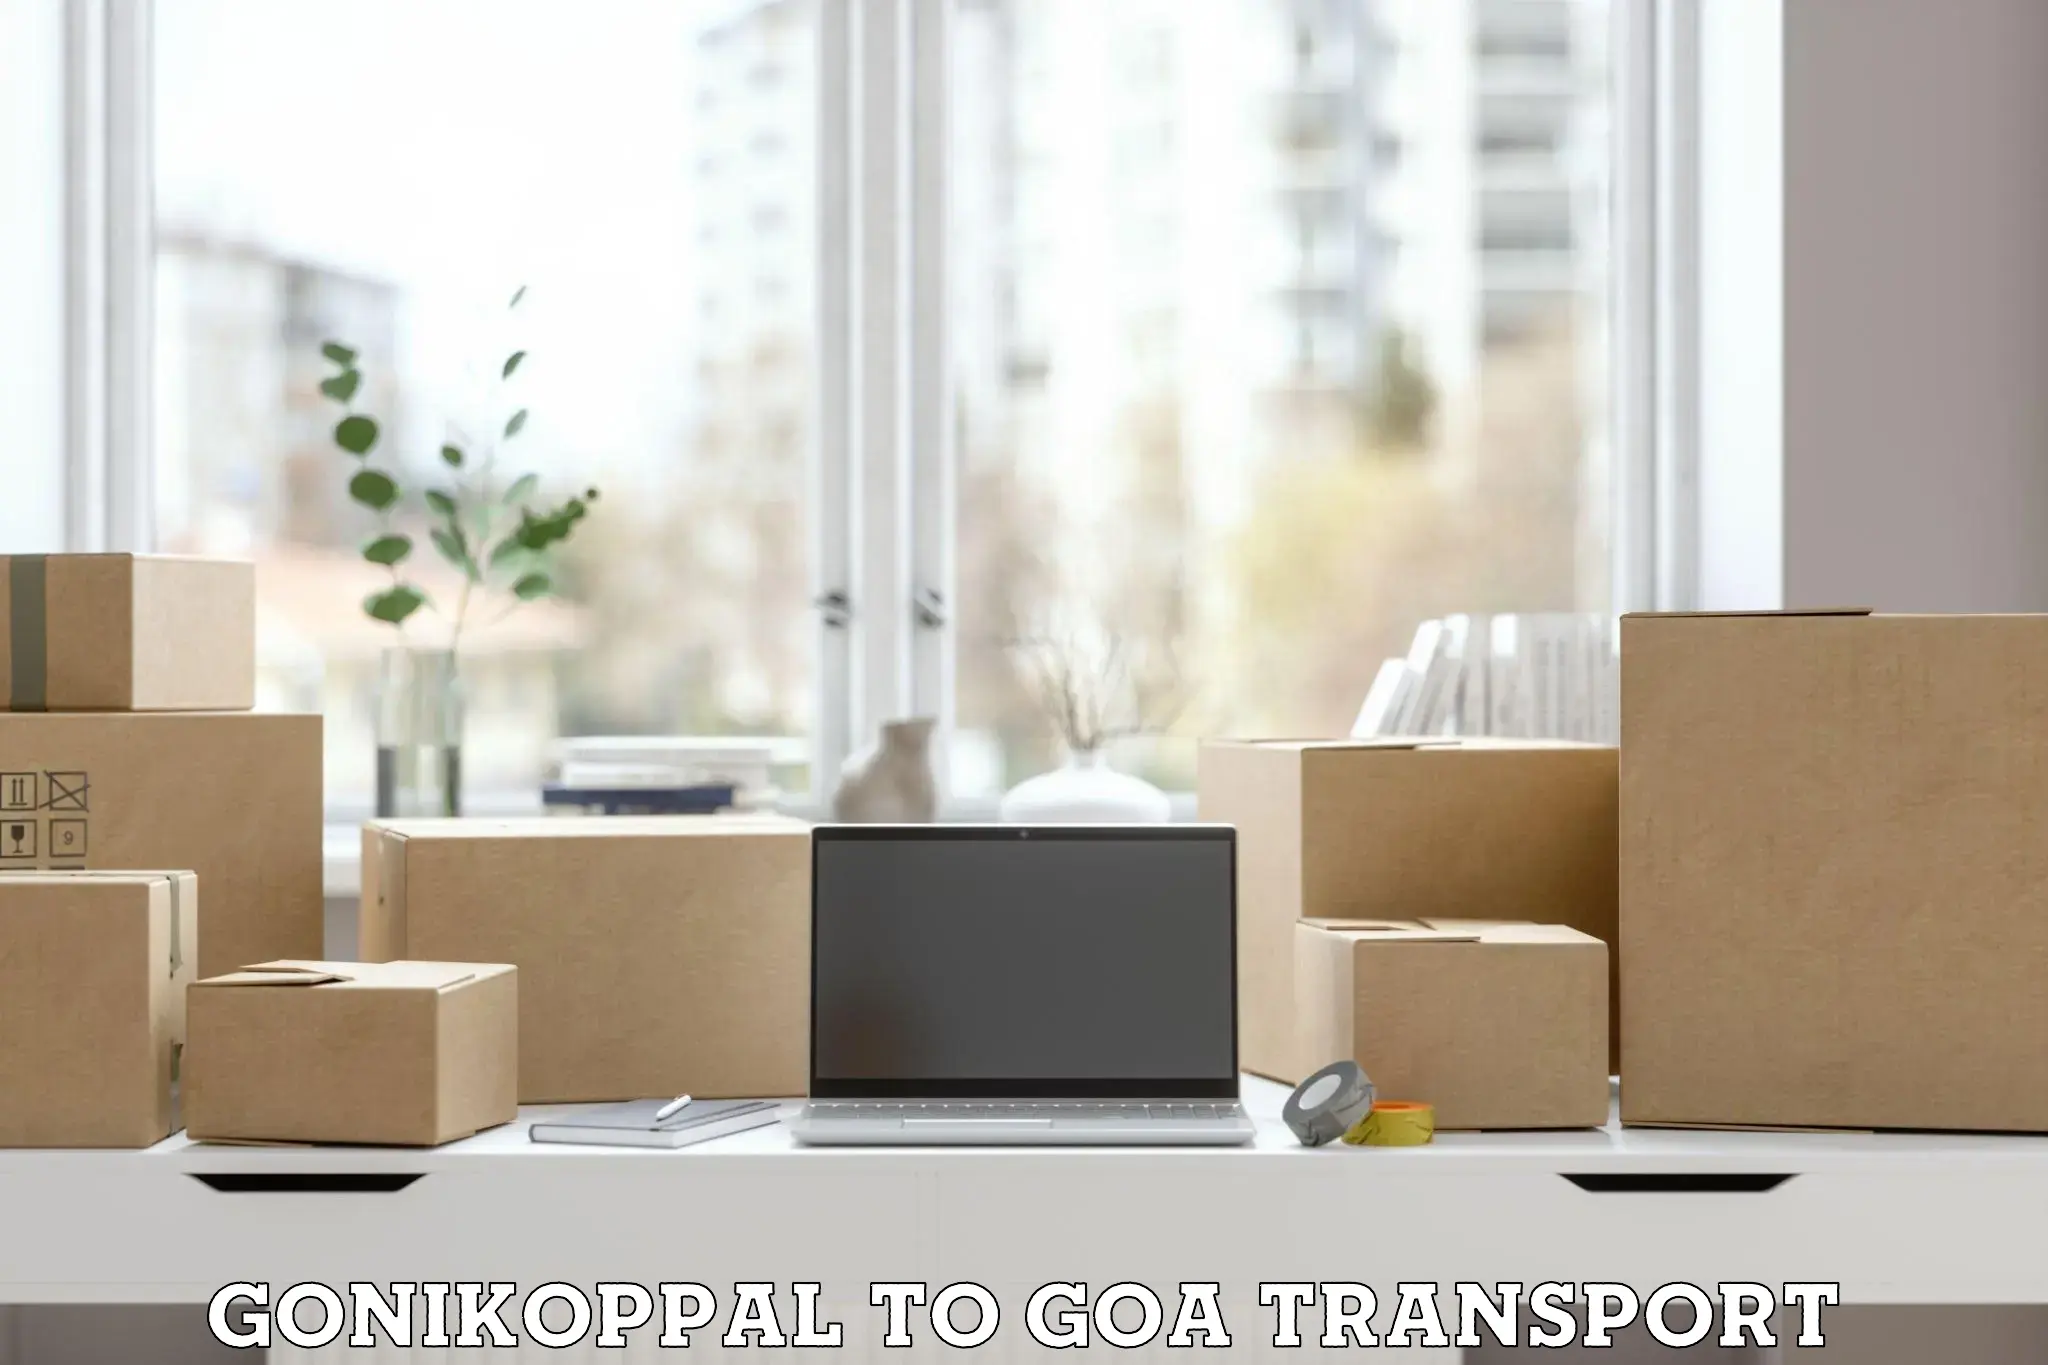 Container transport service Gonikoppal to Mormugao Port